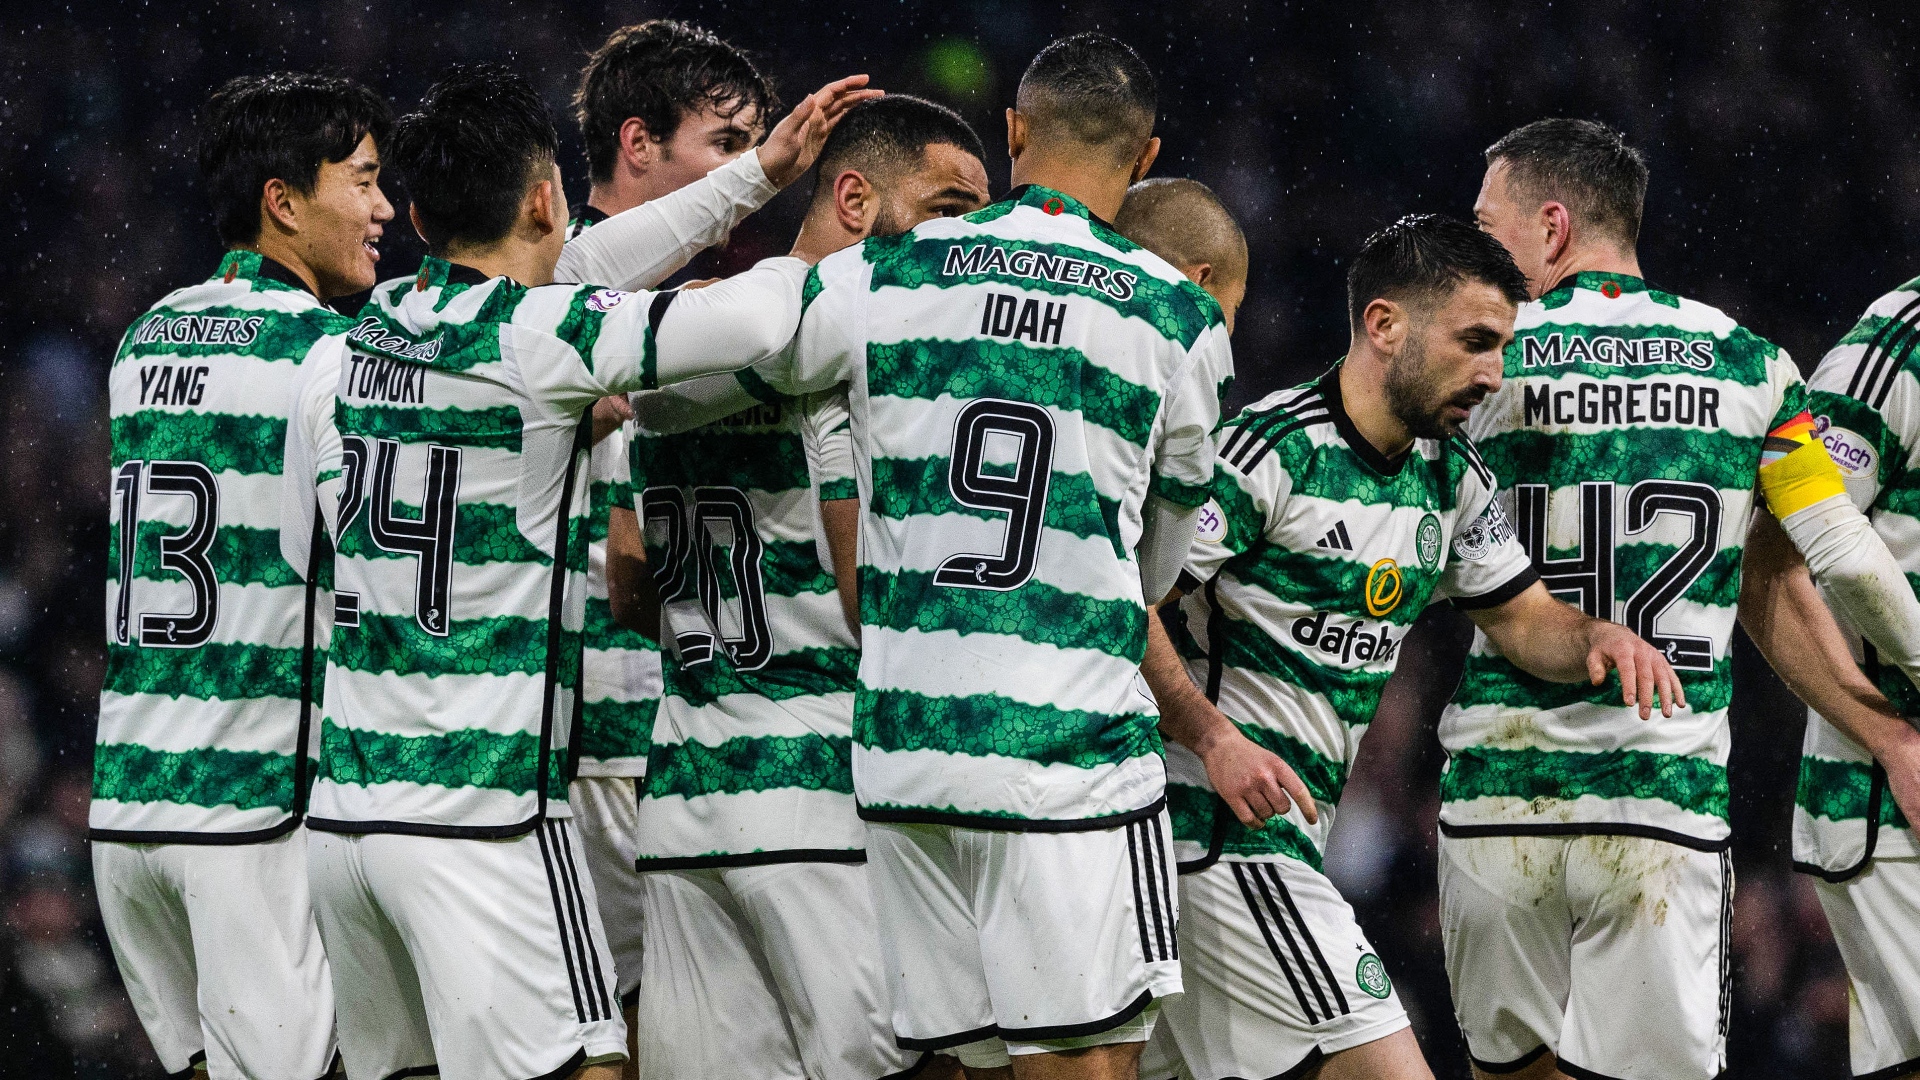 SAD NEWS: Celtic 22-year-old star is set to sign a £10m deal…